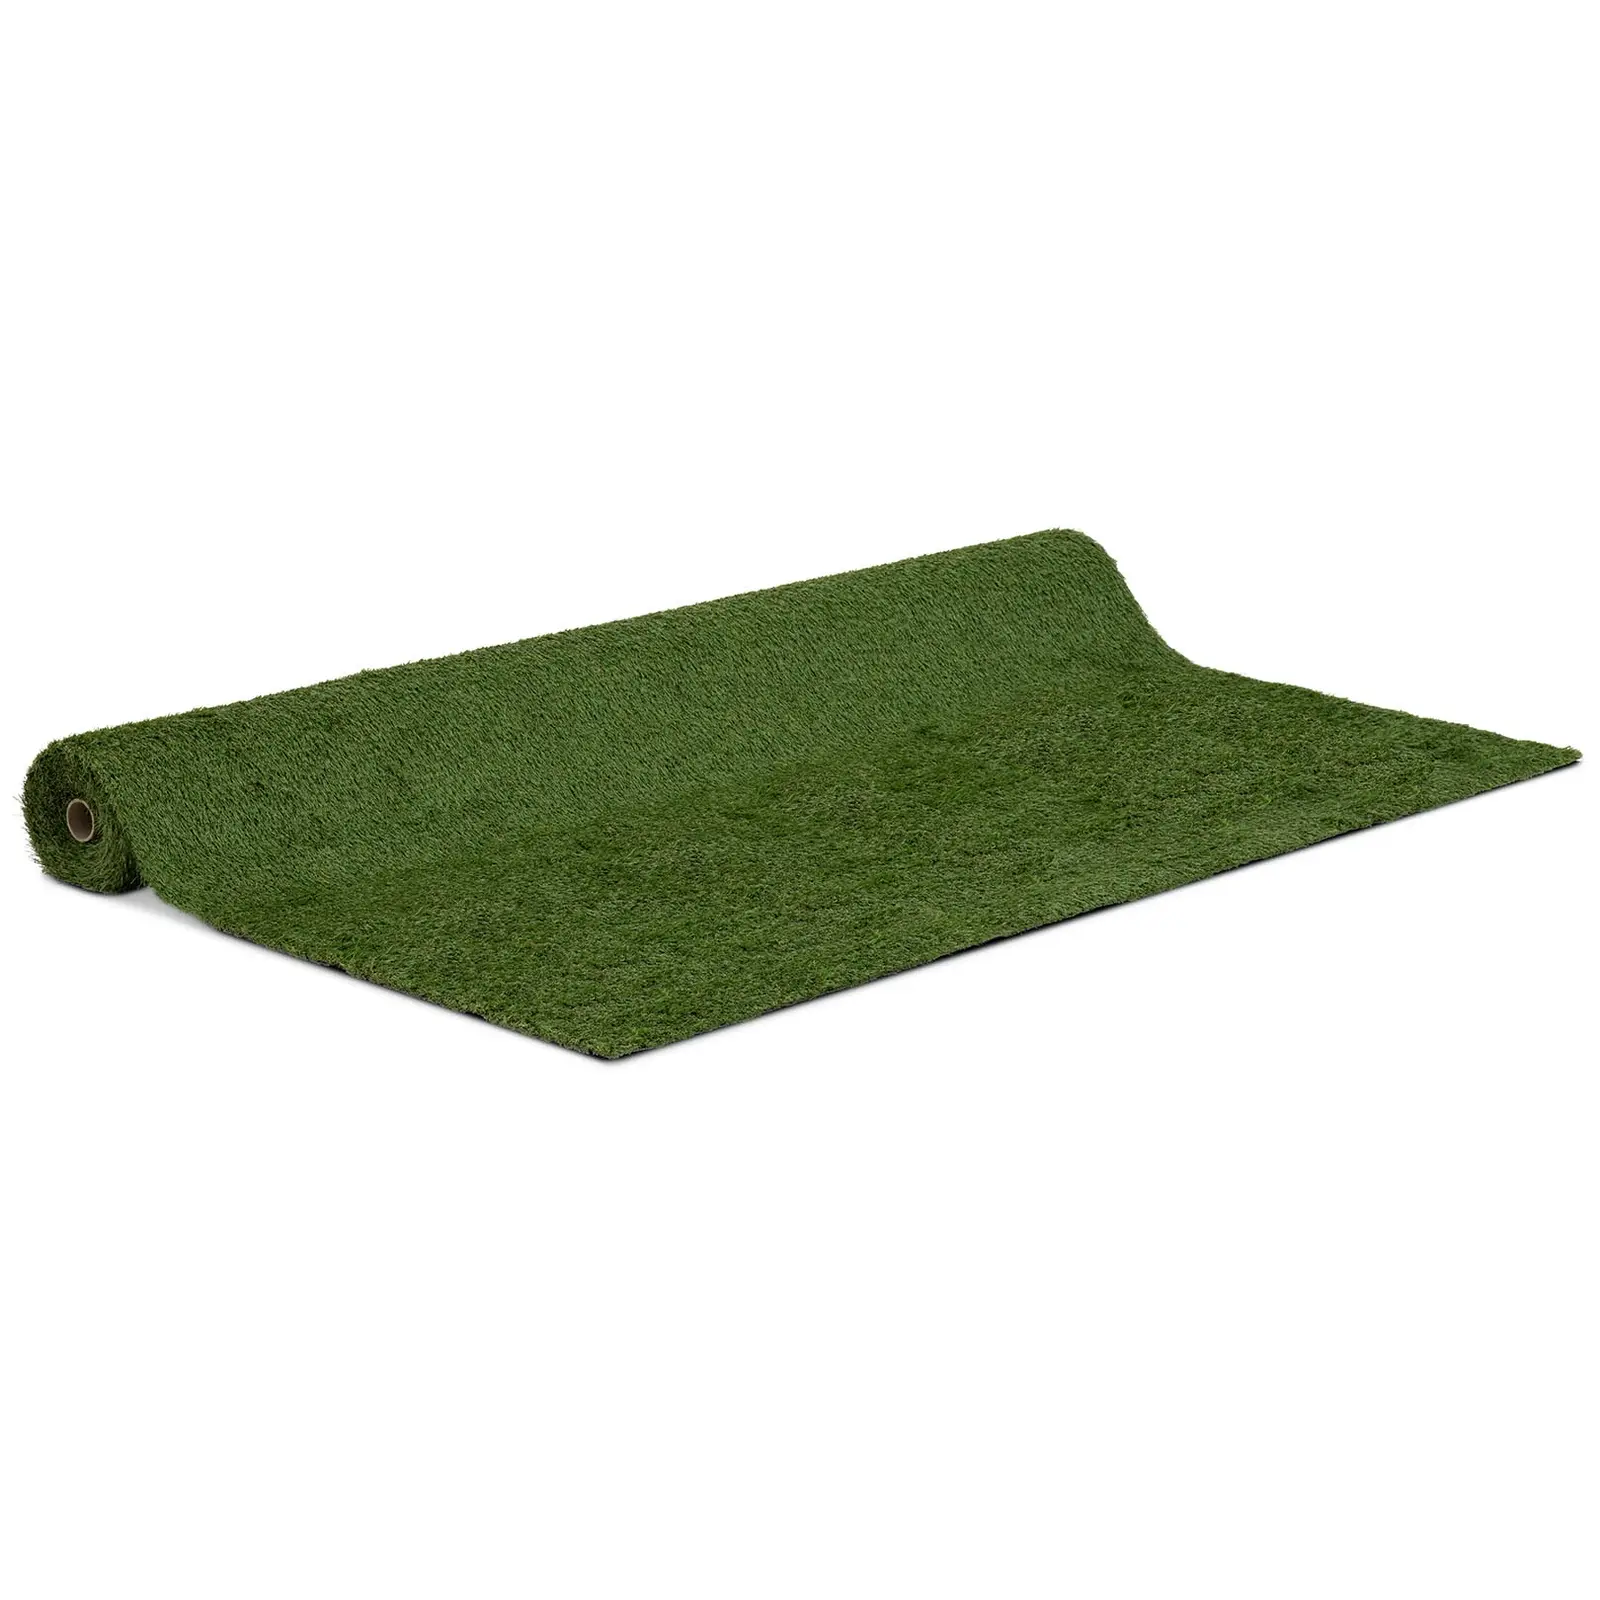 Artificial grass - 200 x 500 cm - Height: 30 mm - Stitch rate: 14/10 cm - UV-resistant